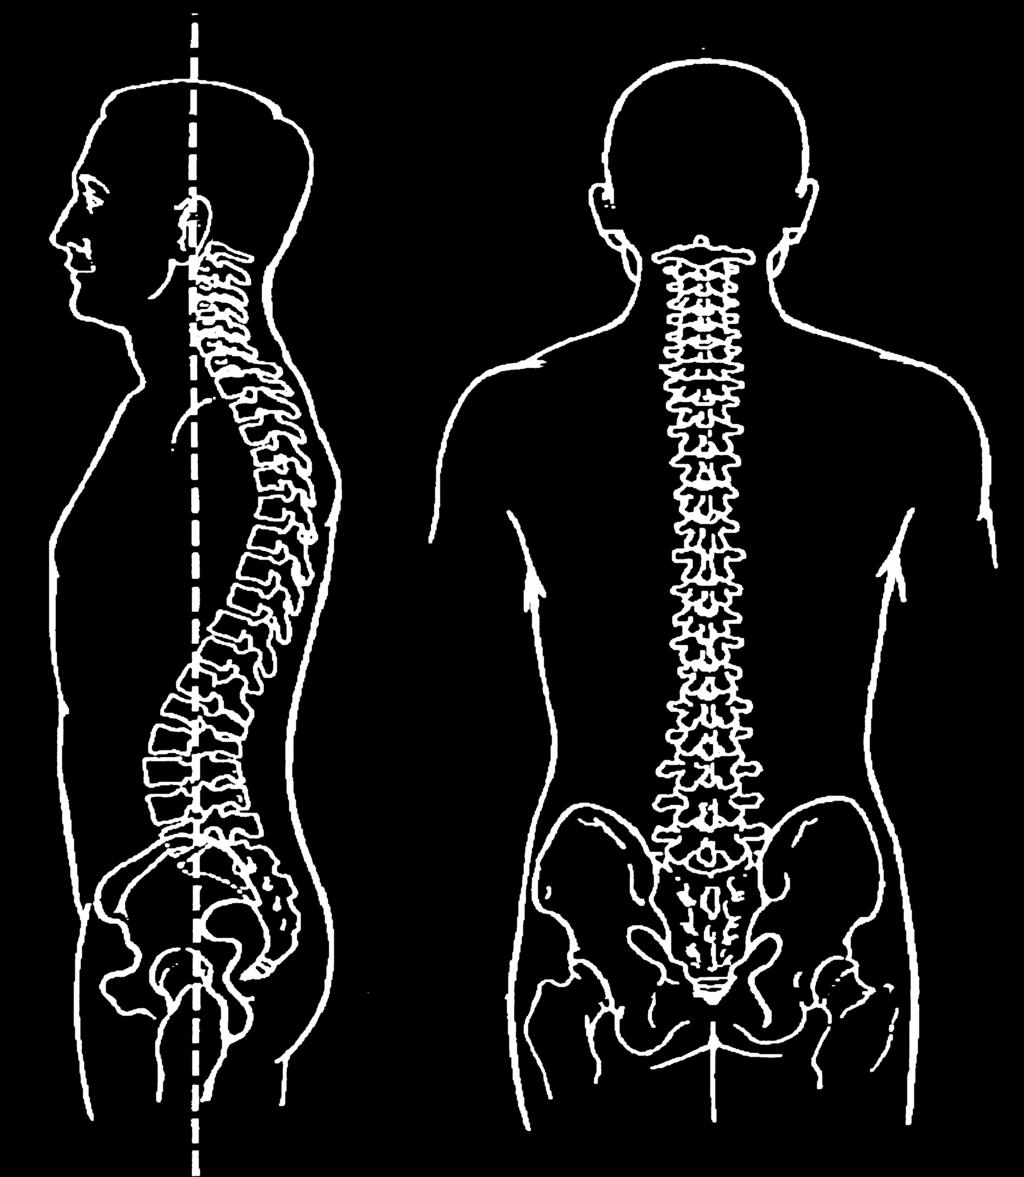 Spinal Cord Injury A Guide for Patients & Families If you have suffered a spinal cord injury, you are not alone in this often long and frustrating journey.